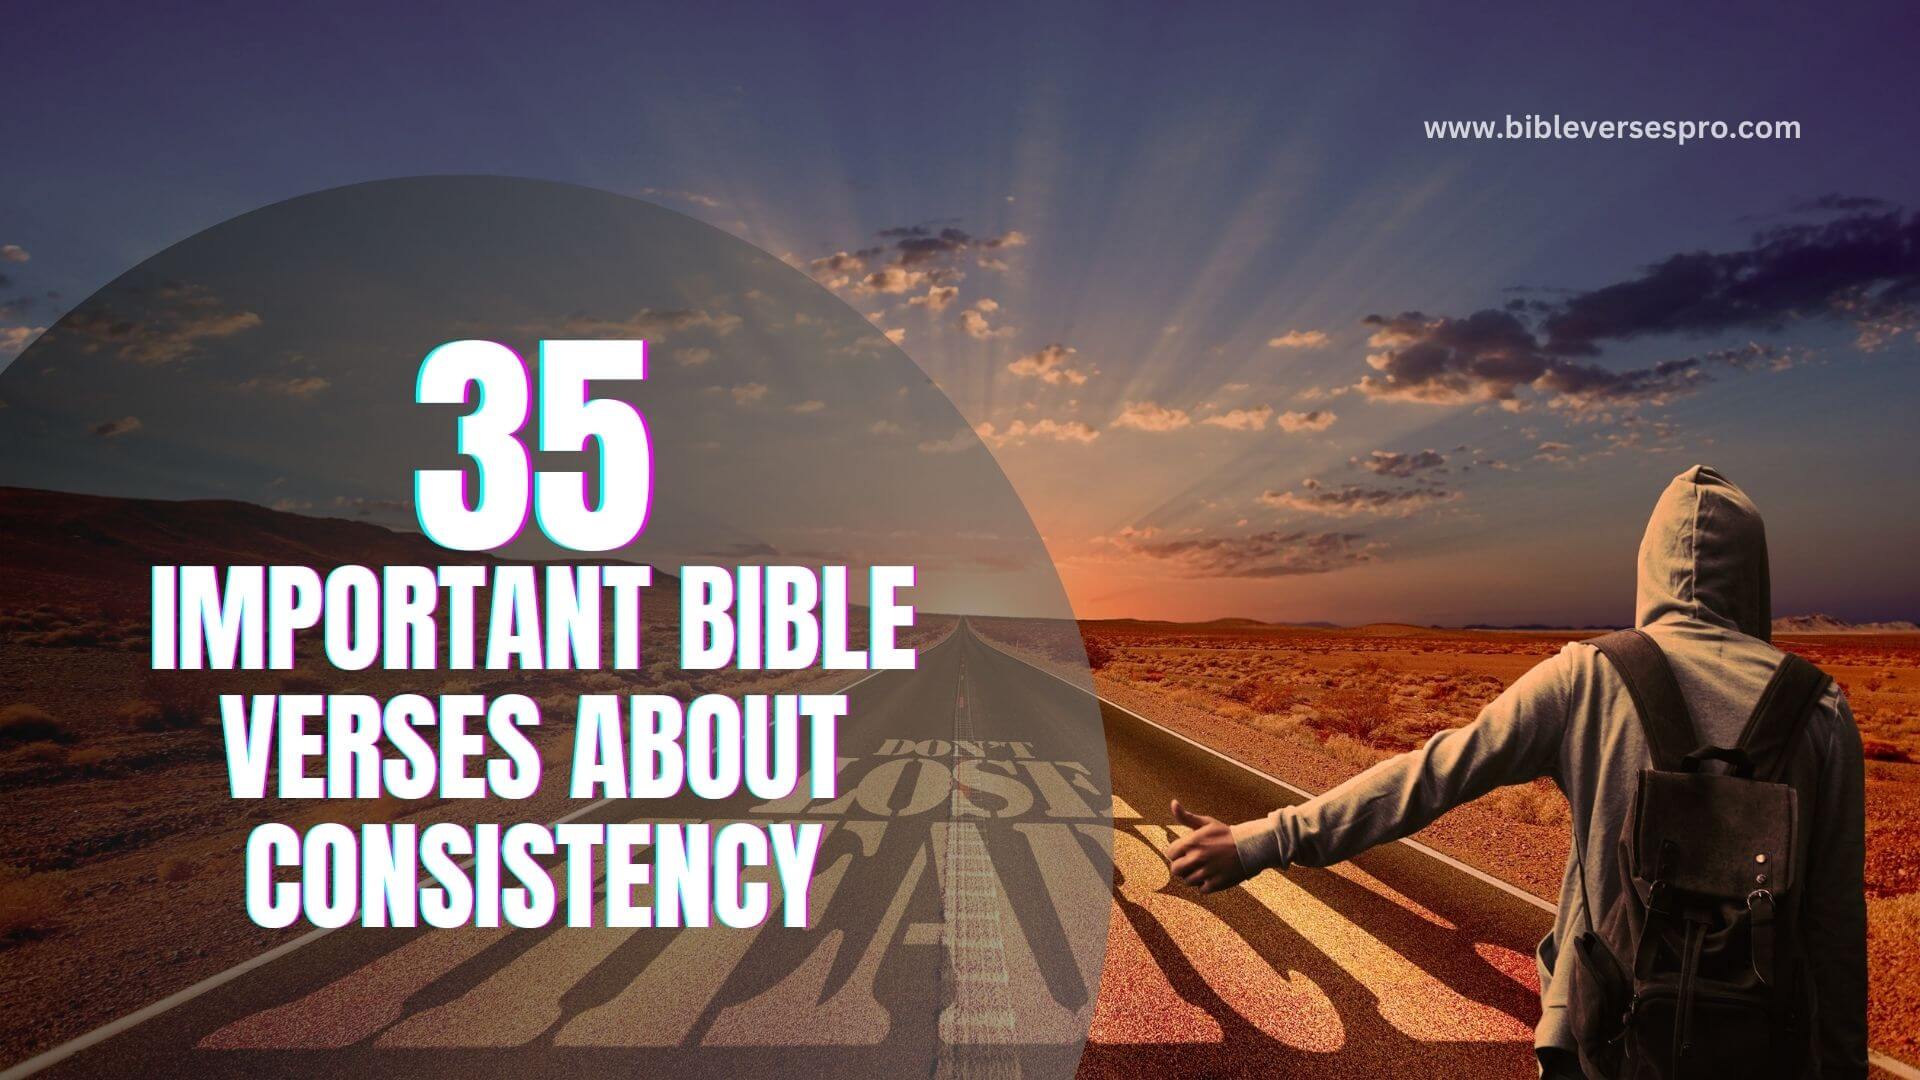 35 Important Bible Verses About Consistency